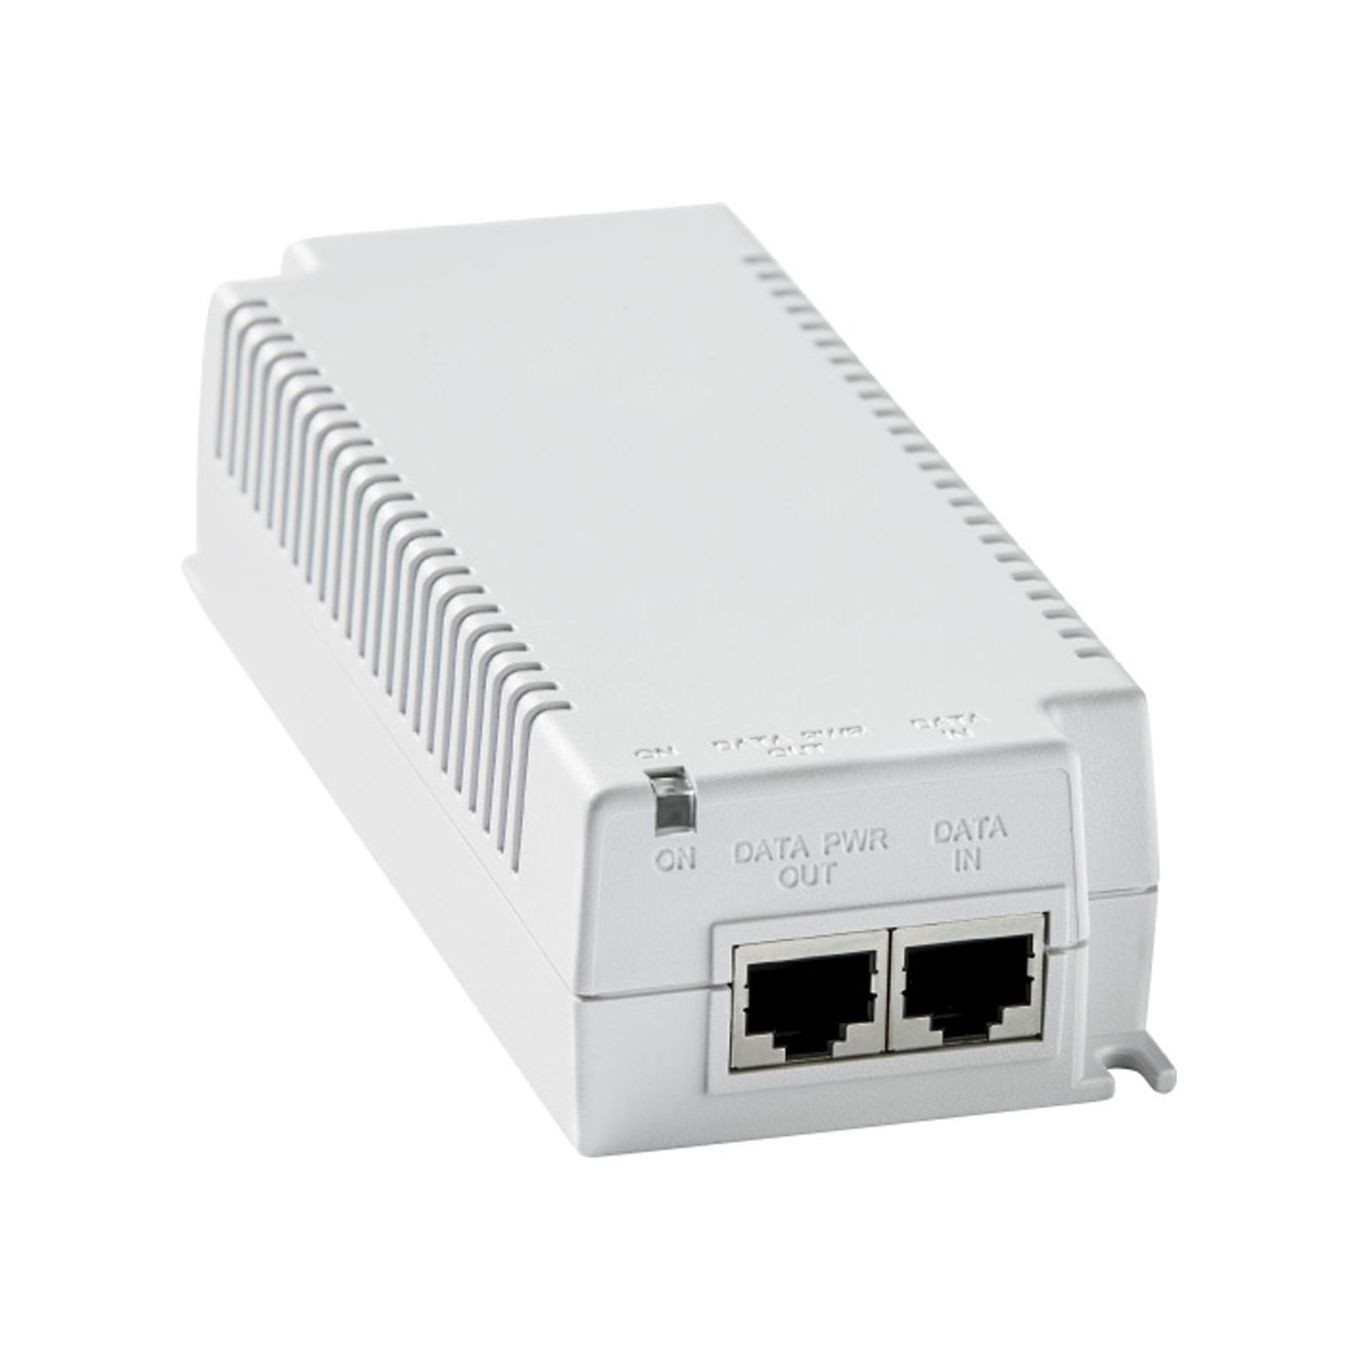 Bosch High PoE Midspan Injector to suit PTZ Cameras, Single Port, 60W Output